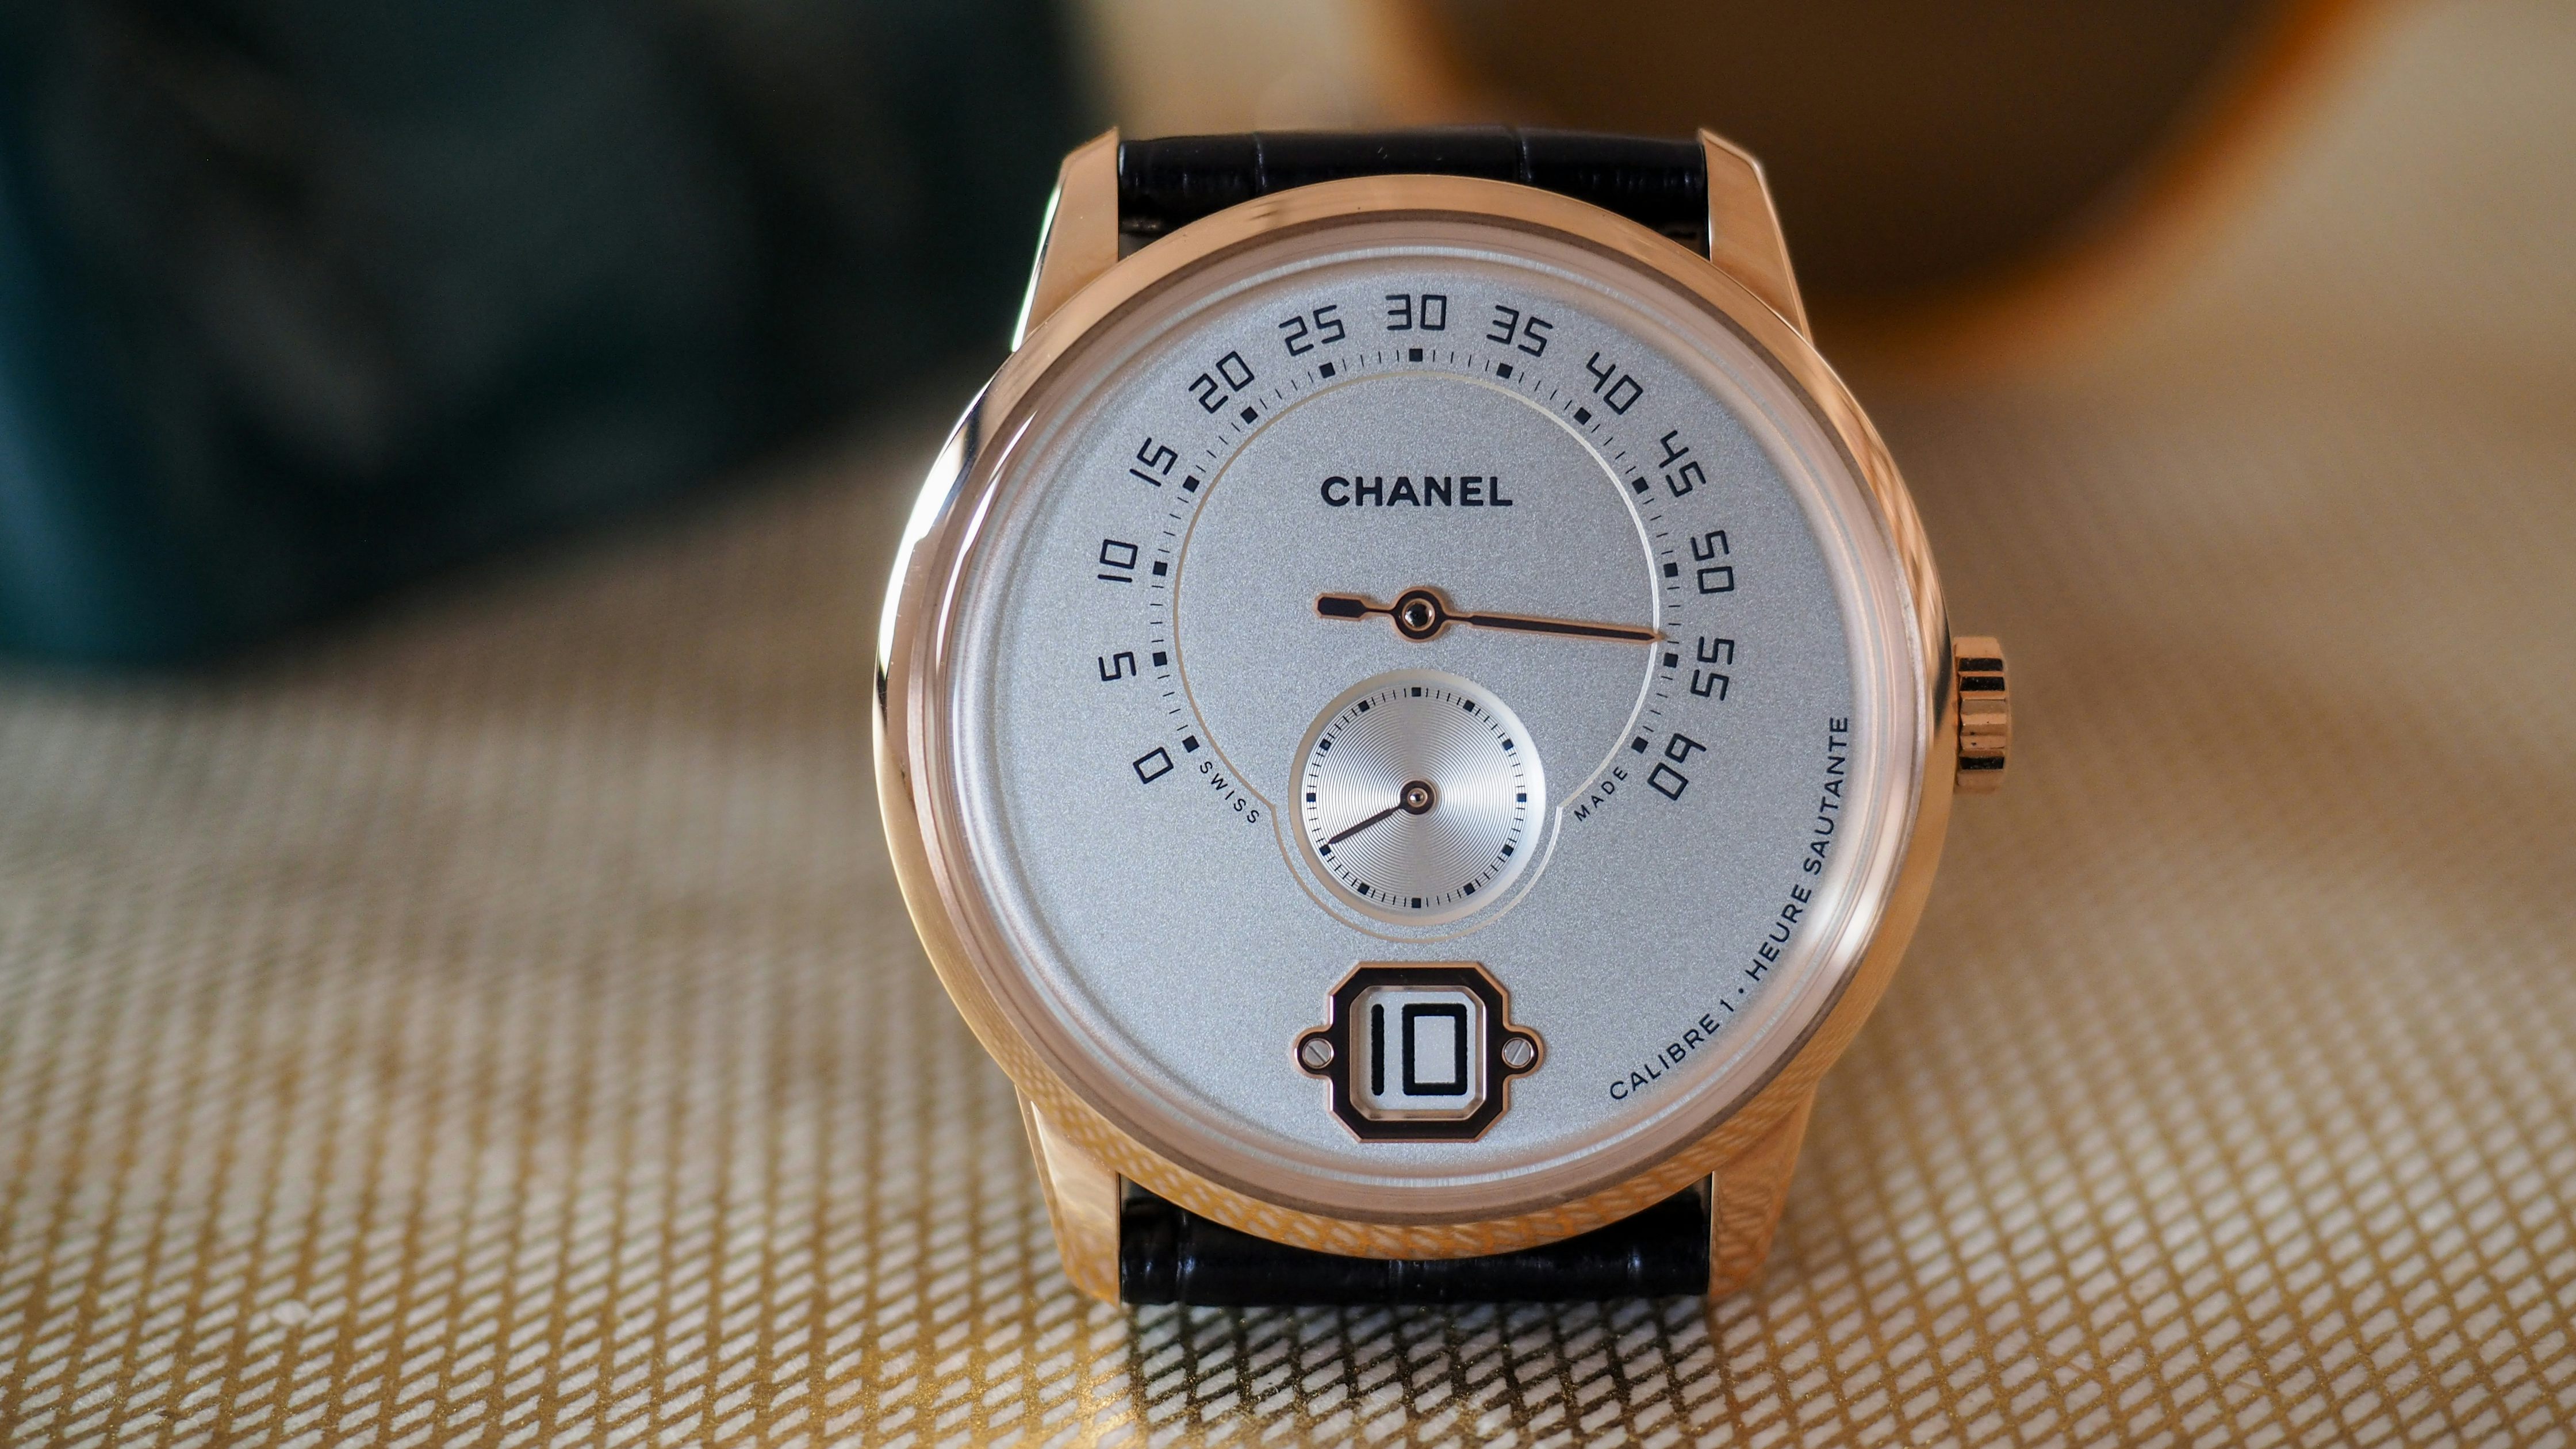 In-Depth: The Chanel Monsieur de Chanel, And The Evolution Of The